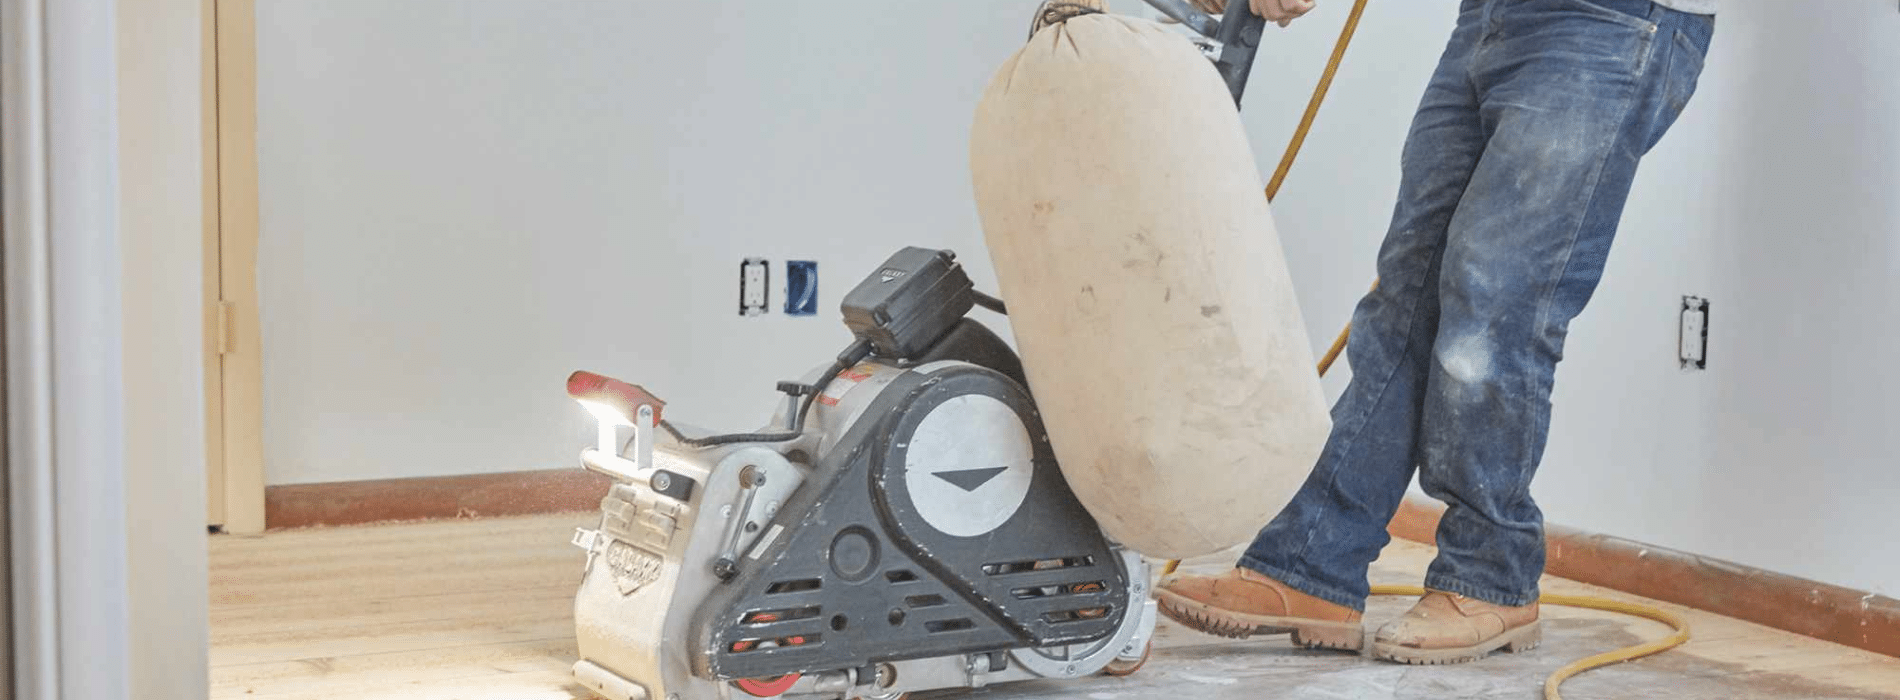 In Harlesden, NW10, Mr Sander® are sanding a parquet floor using a Bona Scorpion drum sander. The sander has a dimension of 200 mm, operates at 1.5 kW power, and runs on a voltage of 240 V at a frequency of 50 Hz.